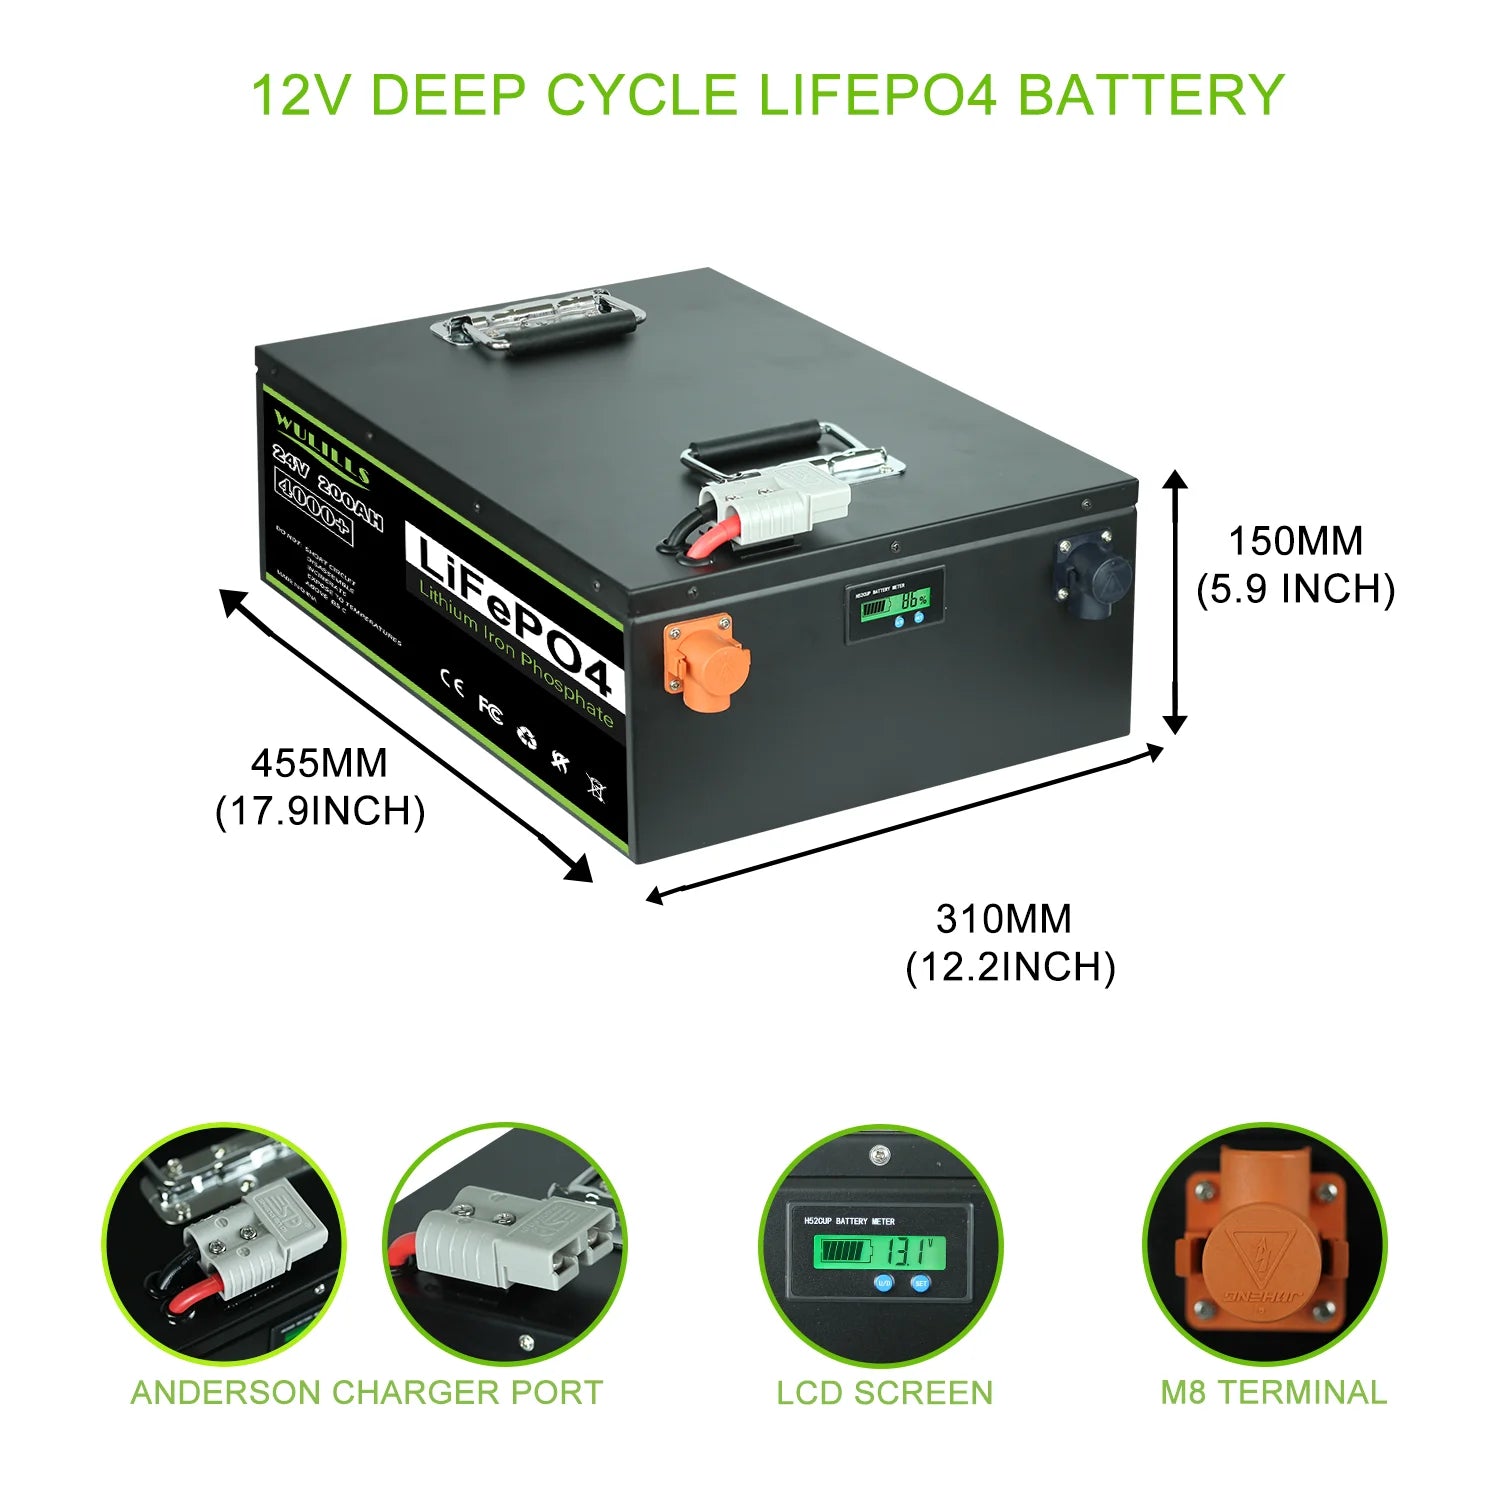 LiFePO4 battery for home energy storage, solar power and BMS included, available in various capacities and voltages.